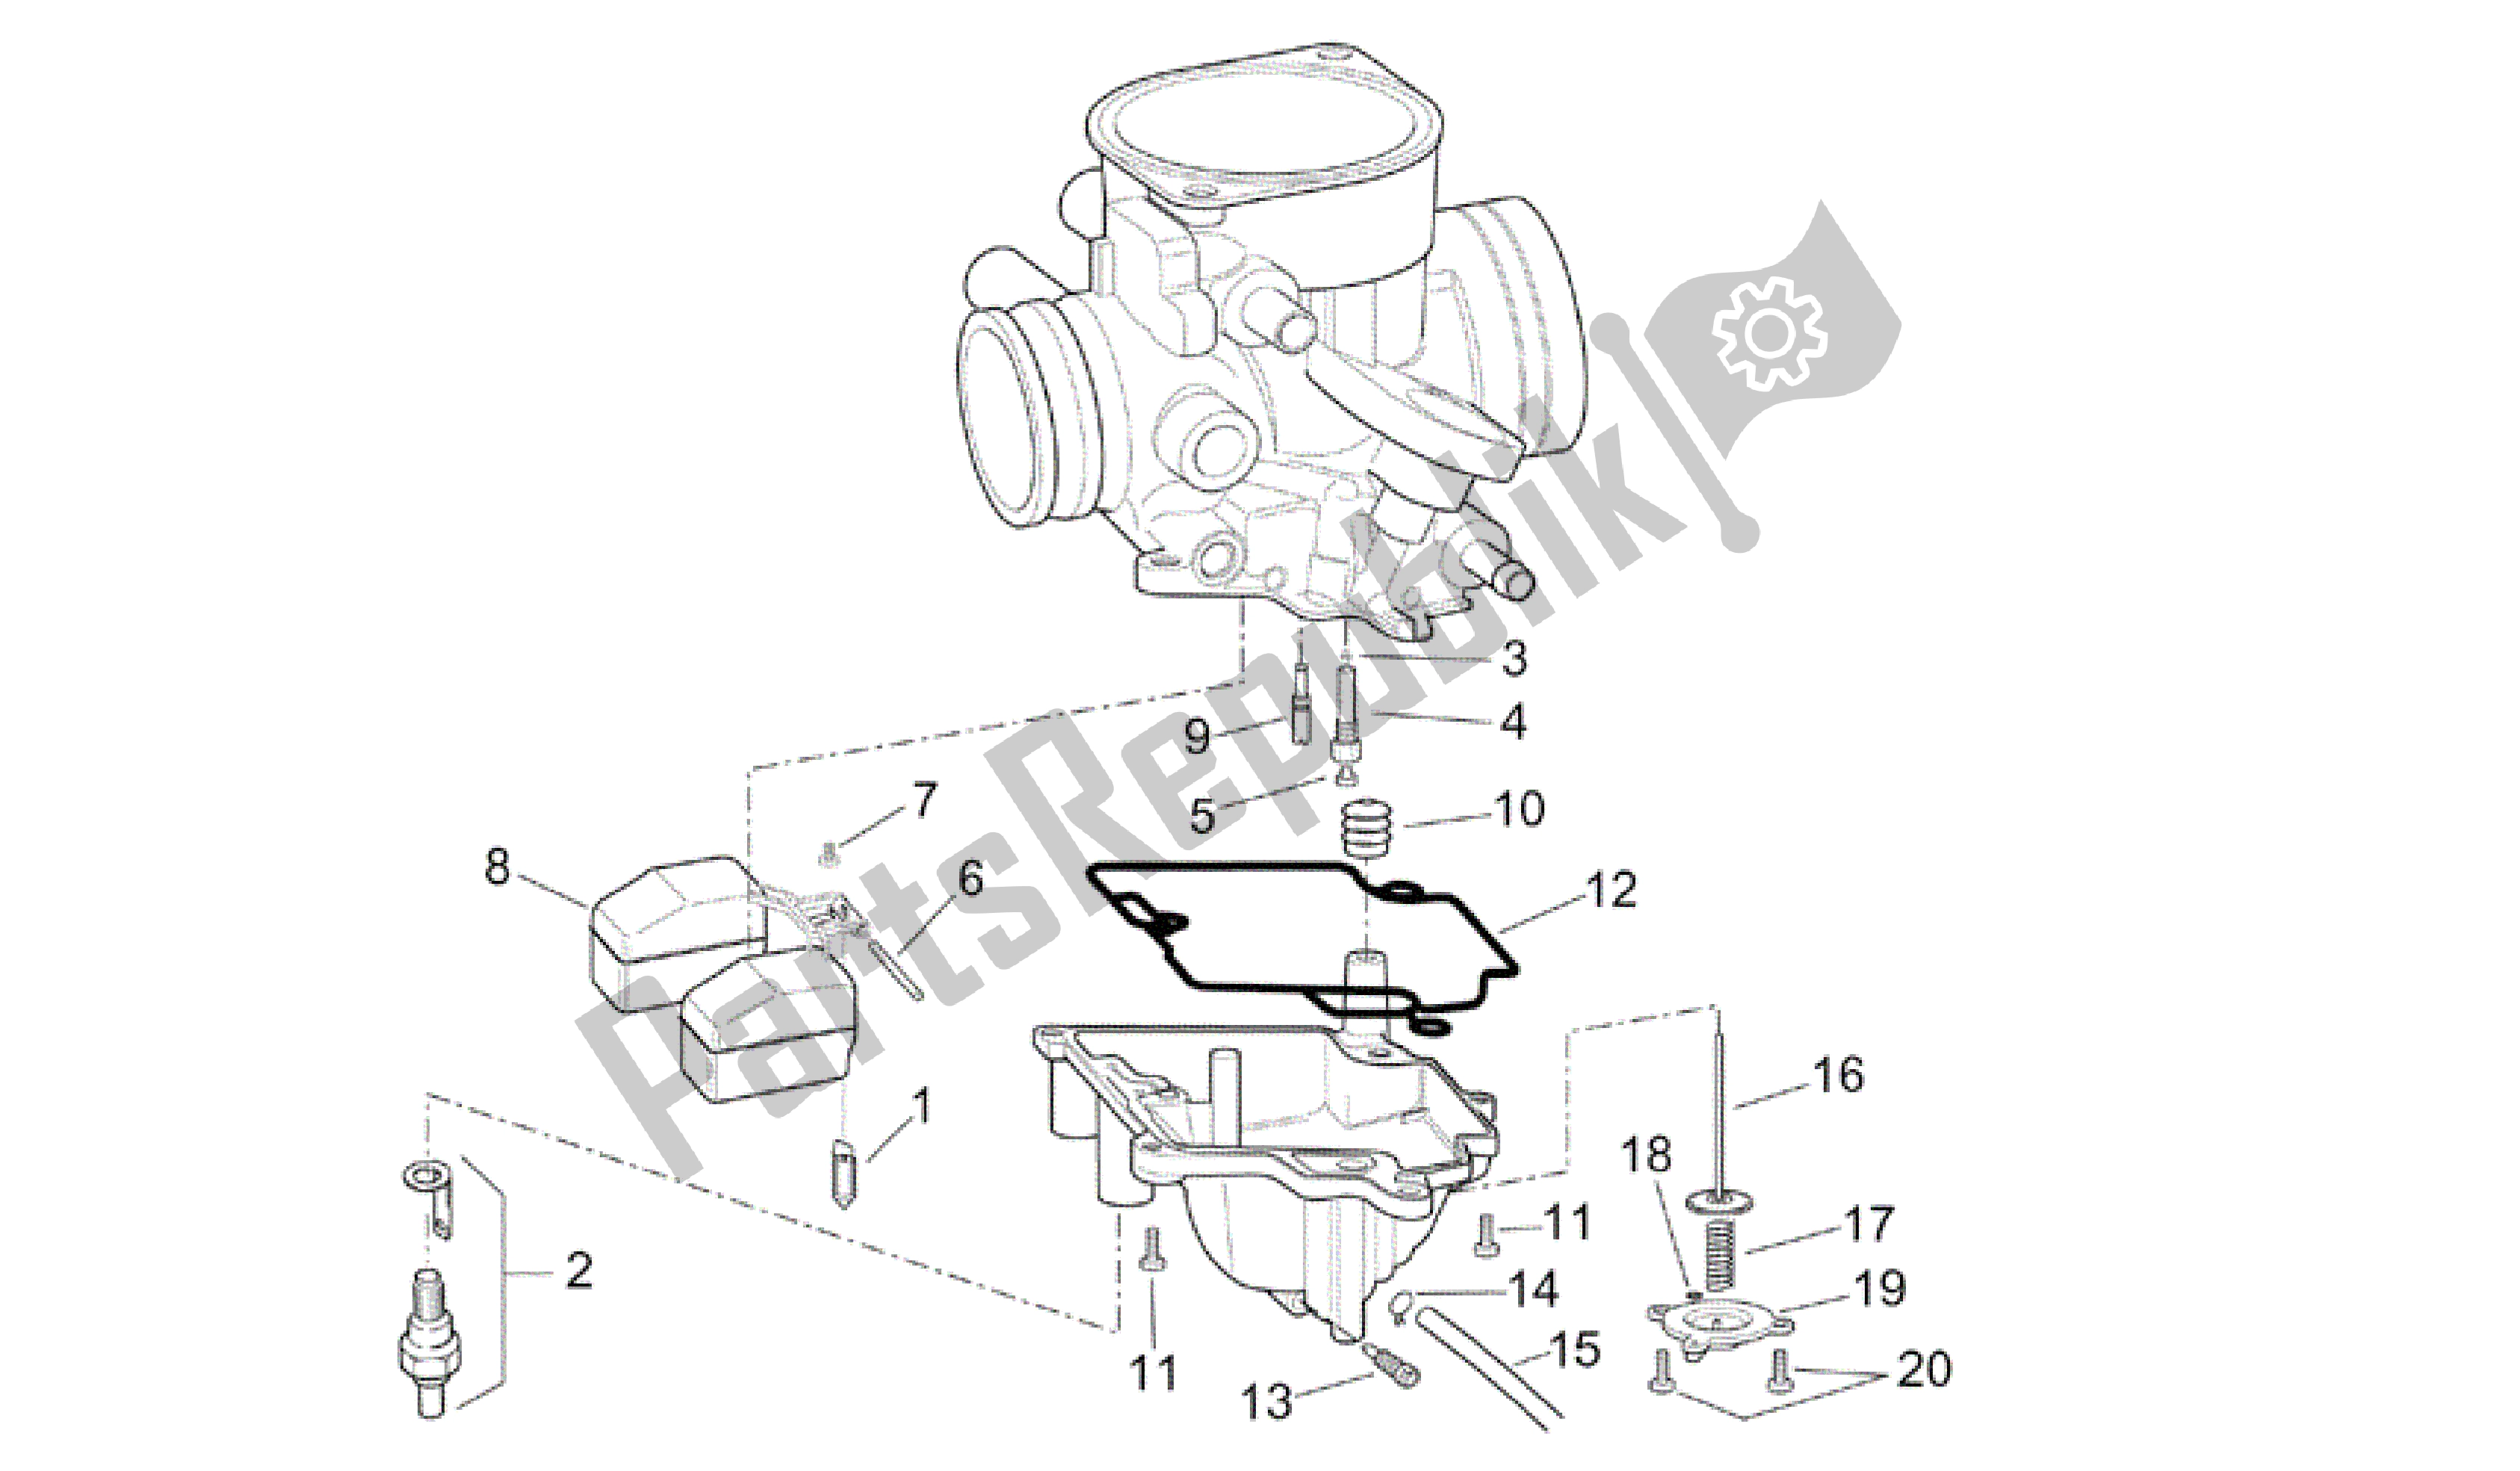 All parts for the Carburettor Iv of the Aprilia Scarabeo 125 1999 - 2004